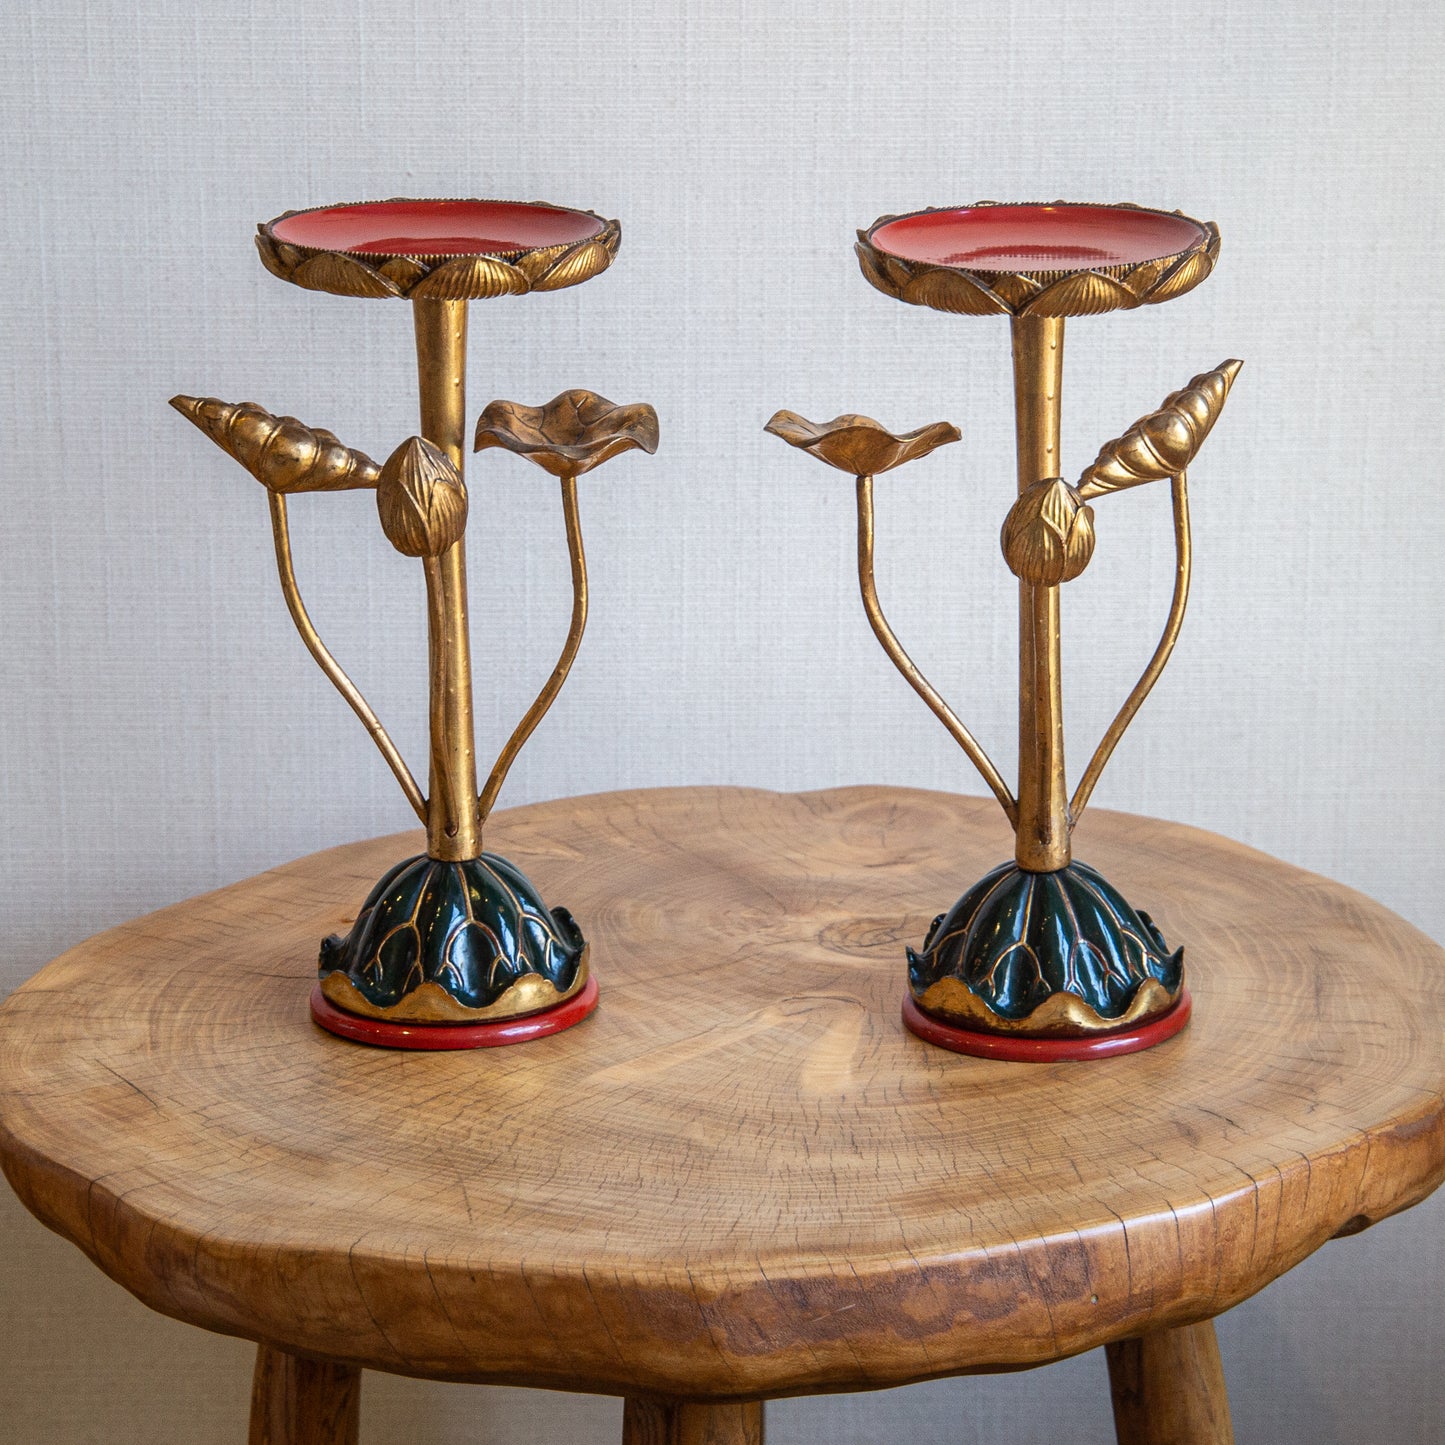 A PAIR OF LACQUER AND GILTWOOD LAMP STANDS